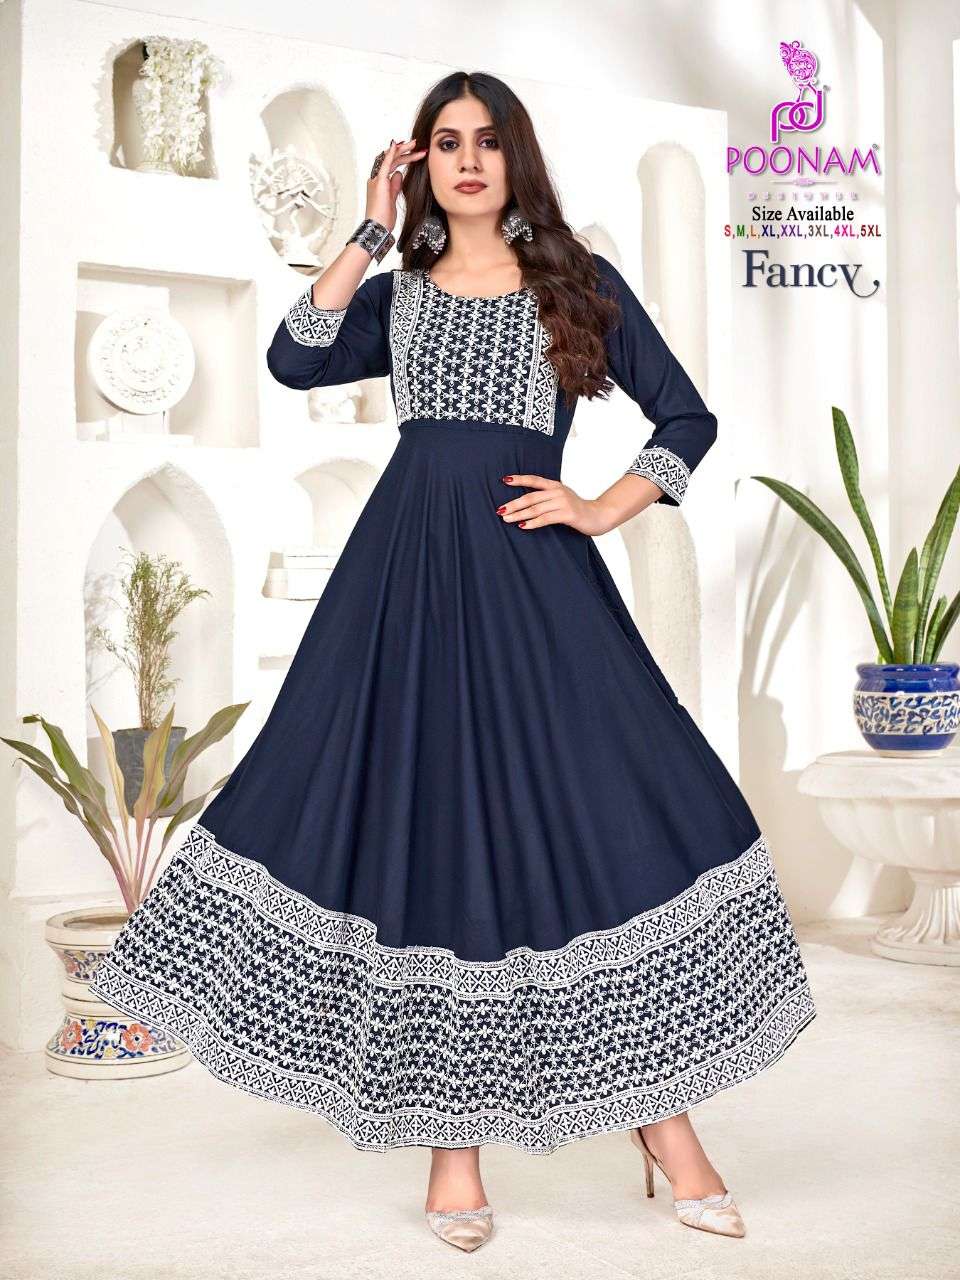 Poonam%20Designer Fancy Pure Rayon Chikan Sequence Work Gown Kurti 1002 1 2022 08 04 16 35 37